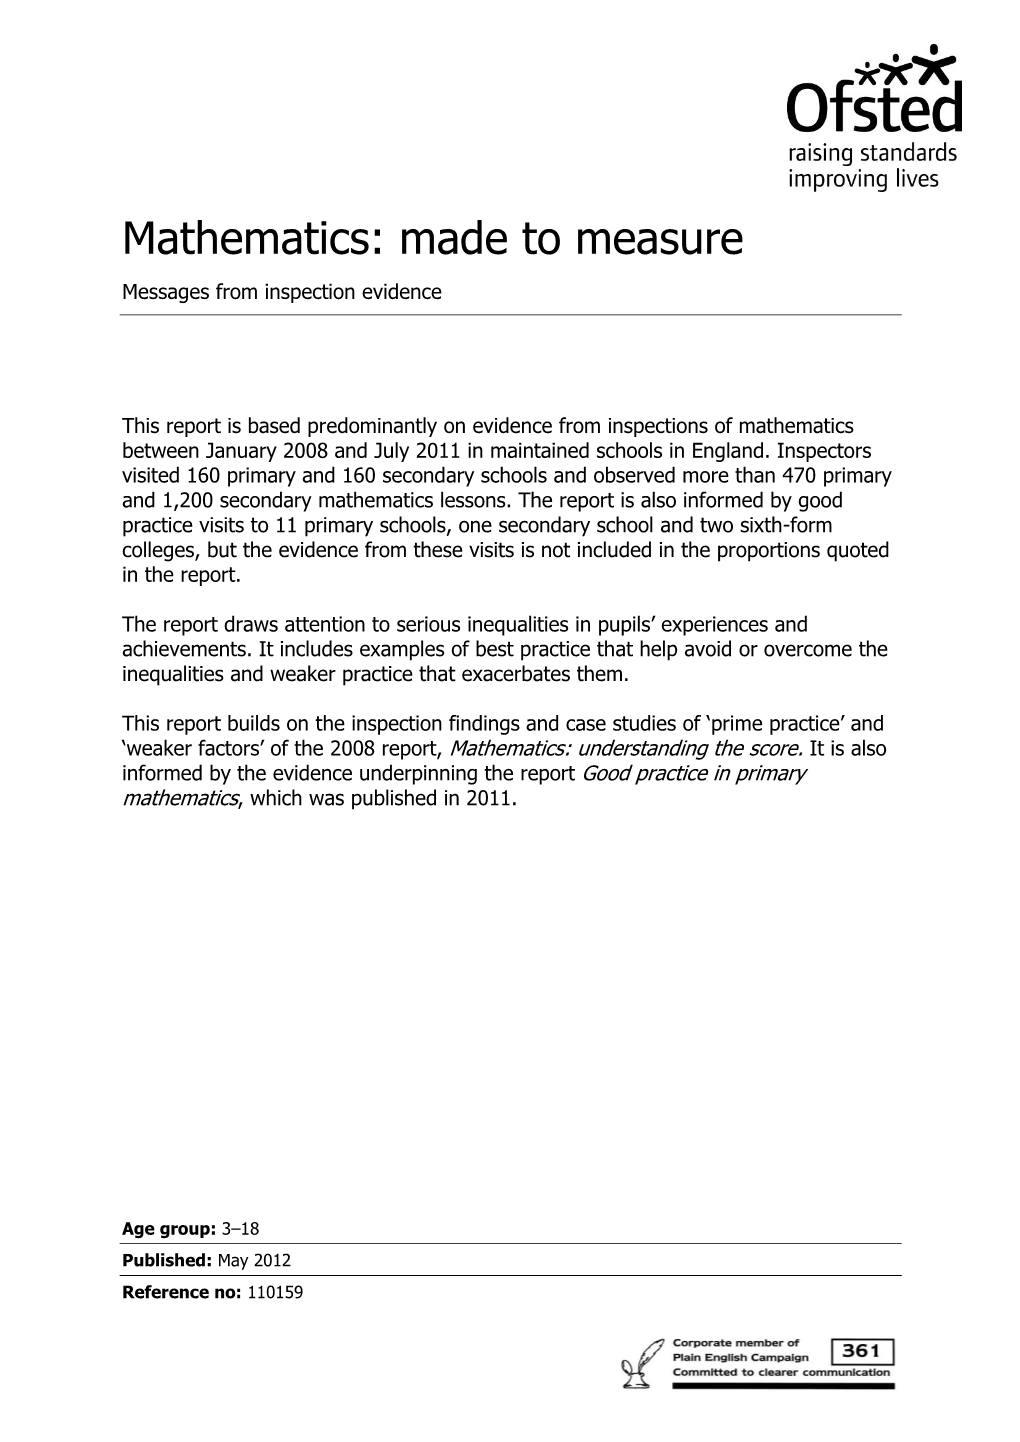 Mathematics: Made to Measure Messages from Inspection Evidence